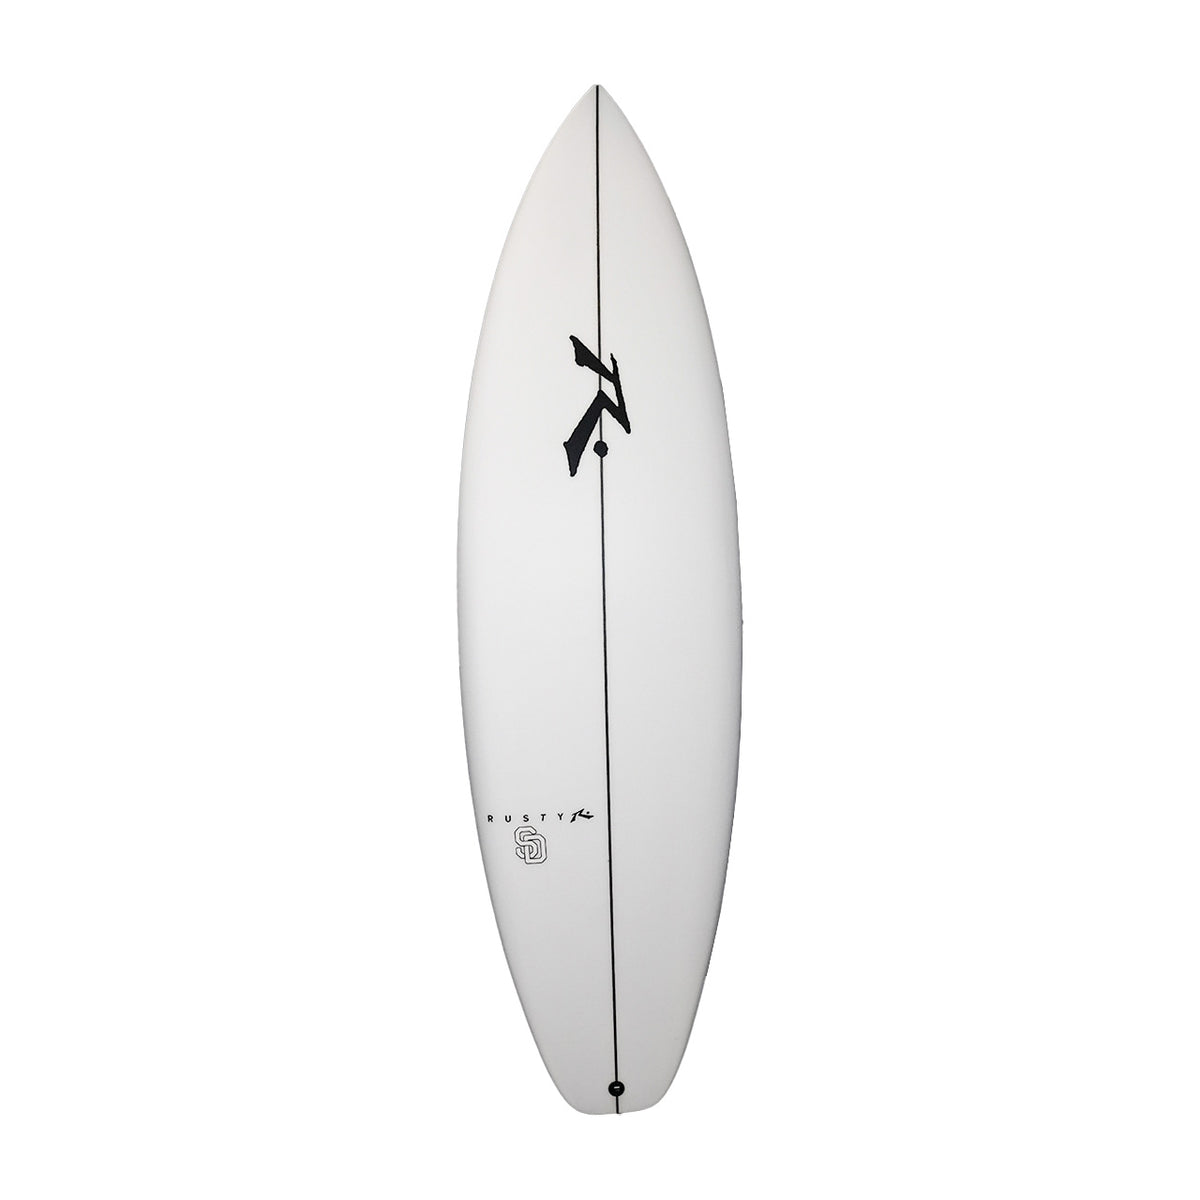 SD Pro Deck View - Rusty Surfboards